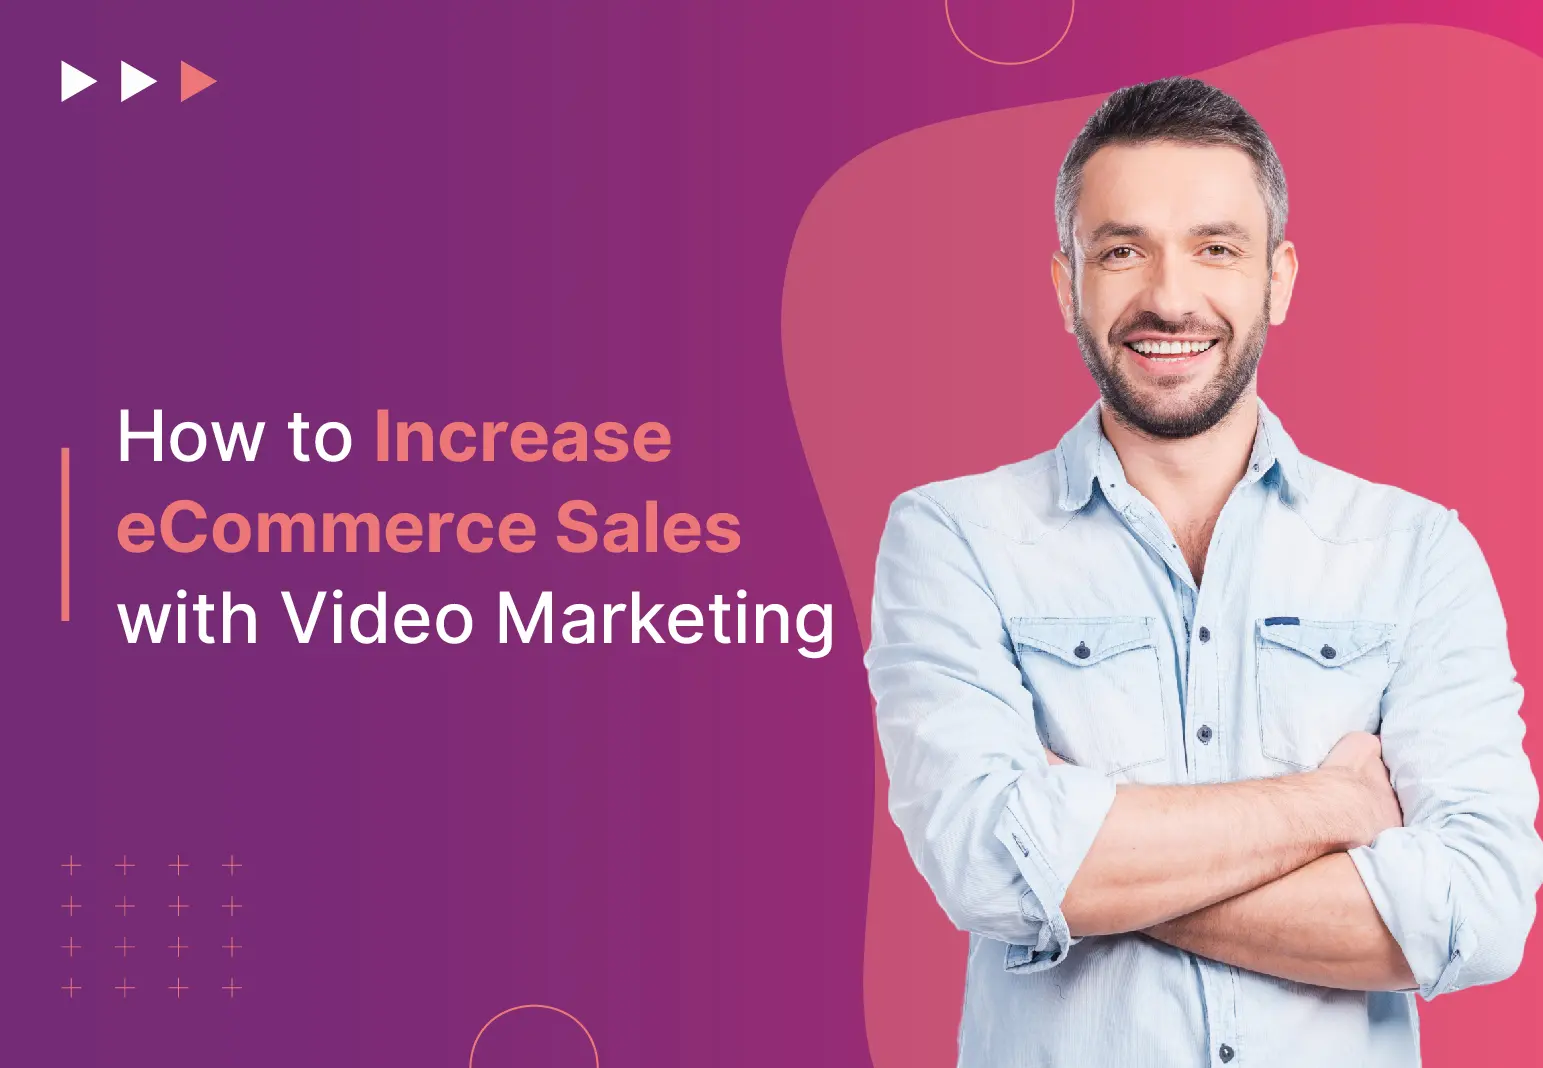 How to increase ecommerce sales with video marketing